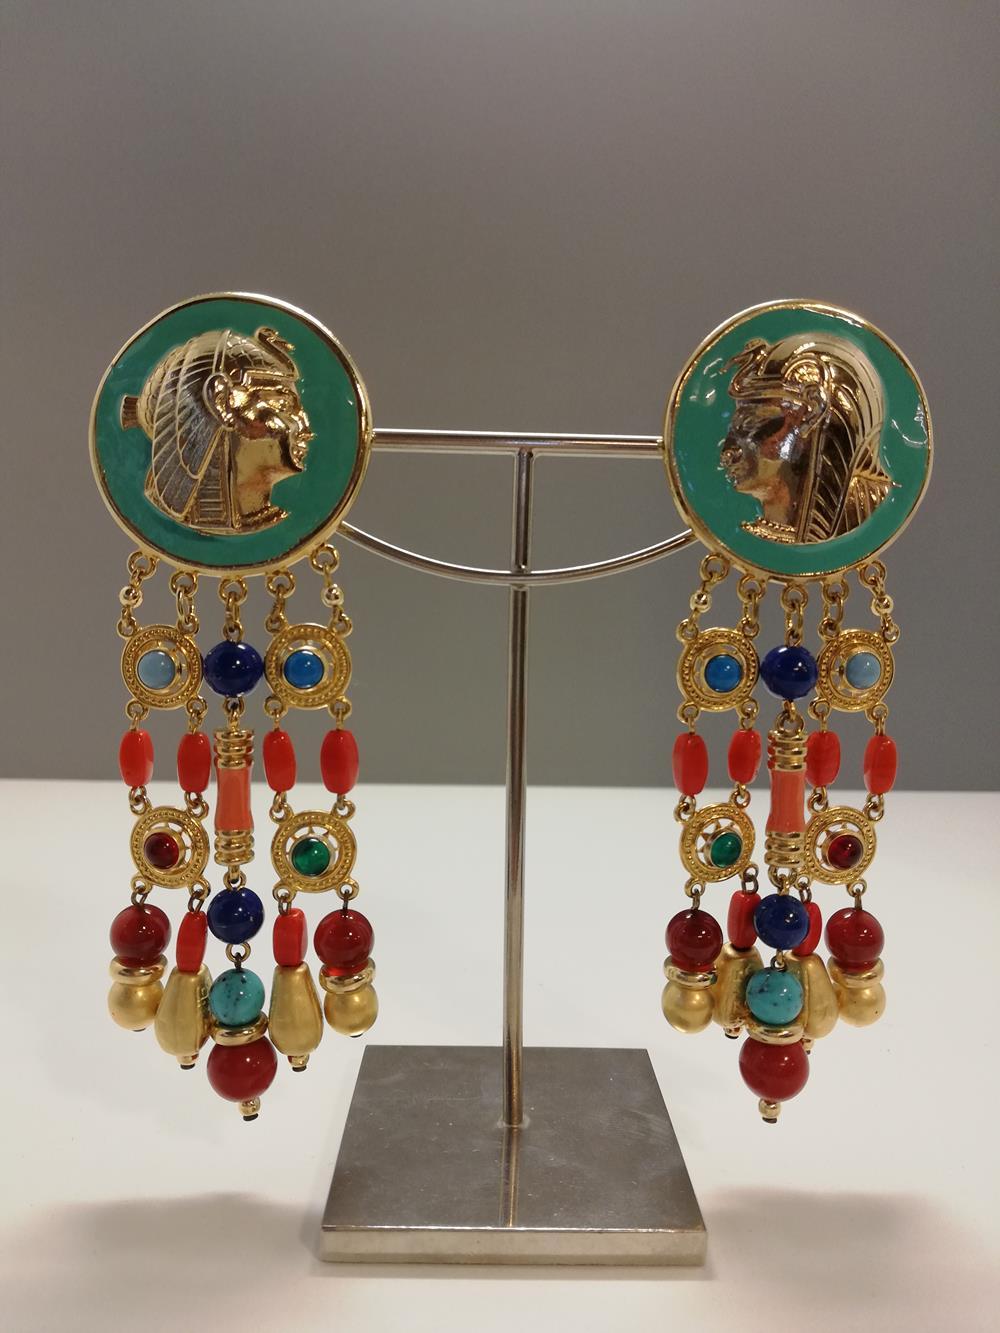 Beautiful and ironic earrings by Carlo Zini
Non allergenic brass
18 KT Gold dipped
Egypt theme
Amazing combinations of multicolored elements
Clip on closure, pierced on request
Length cm 11 (4.33 inches)
100% Artisanal work, made in Milan
Worldwide